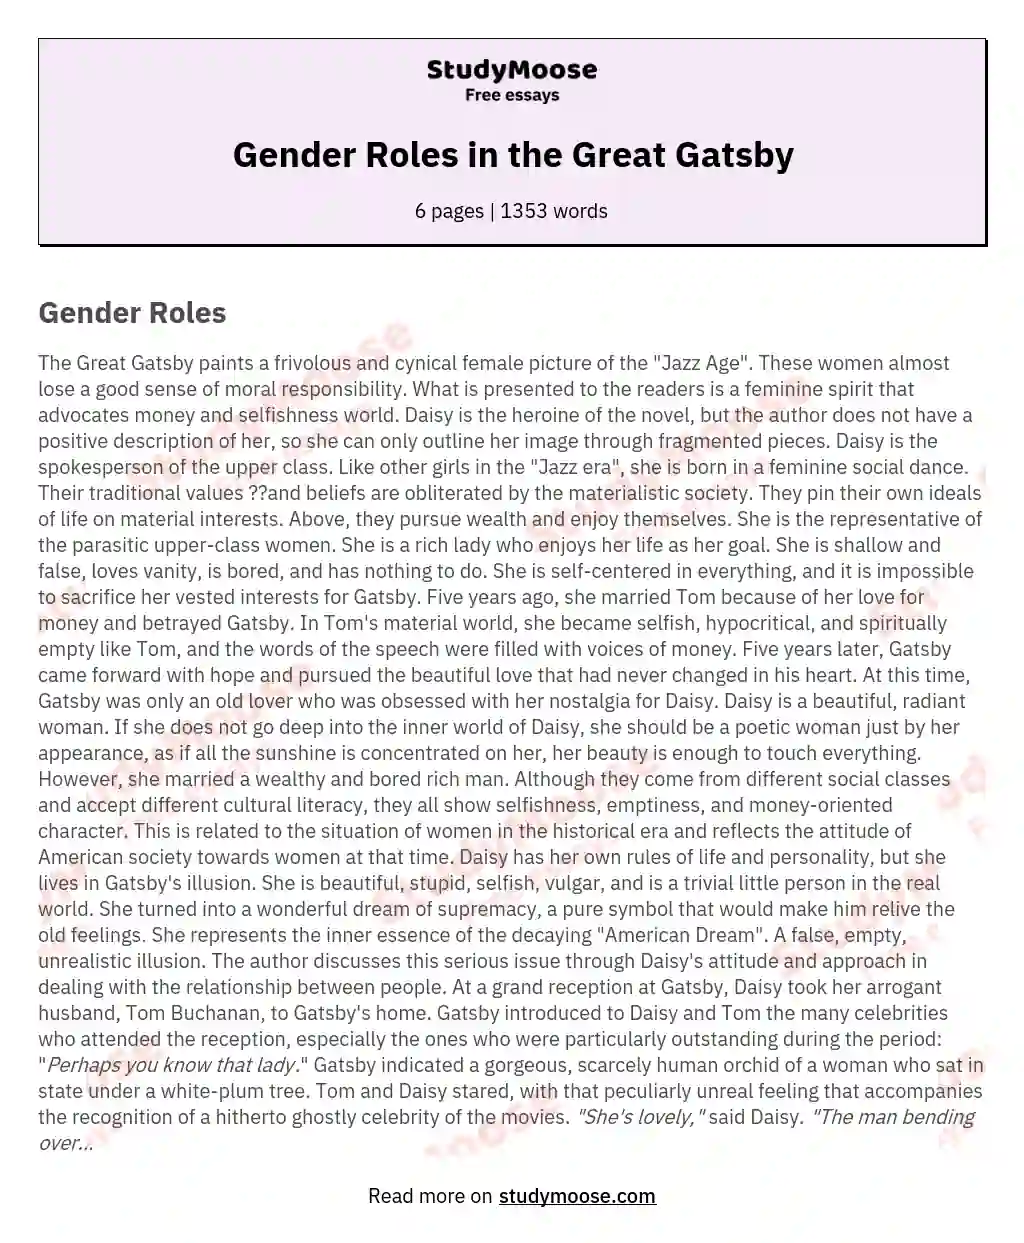 Gender Roles in the Great Gatsby essay